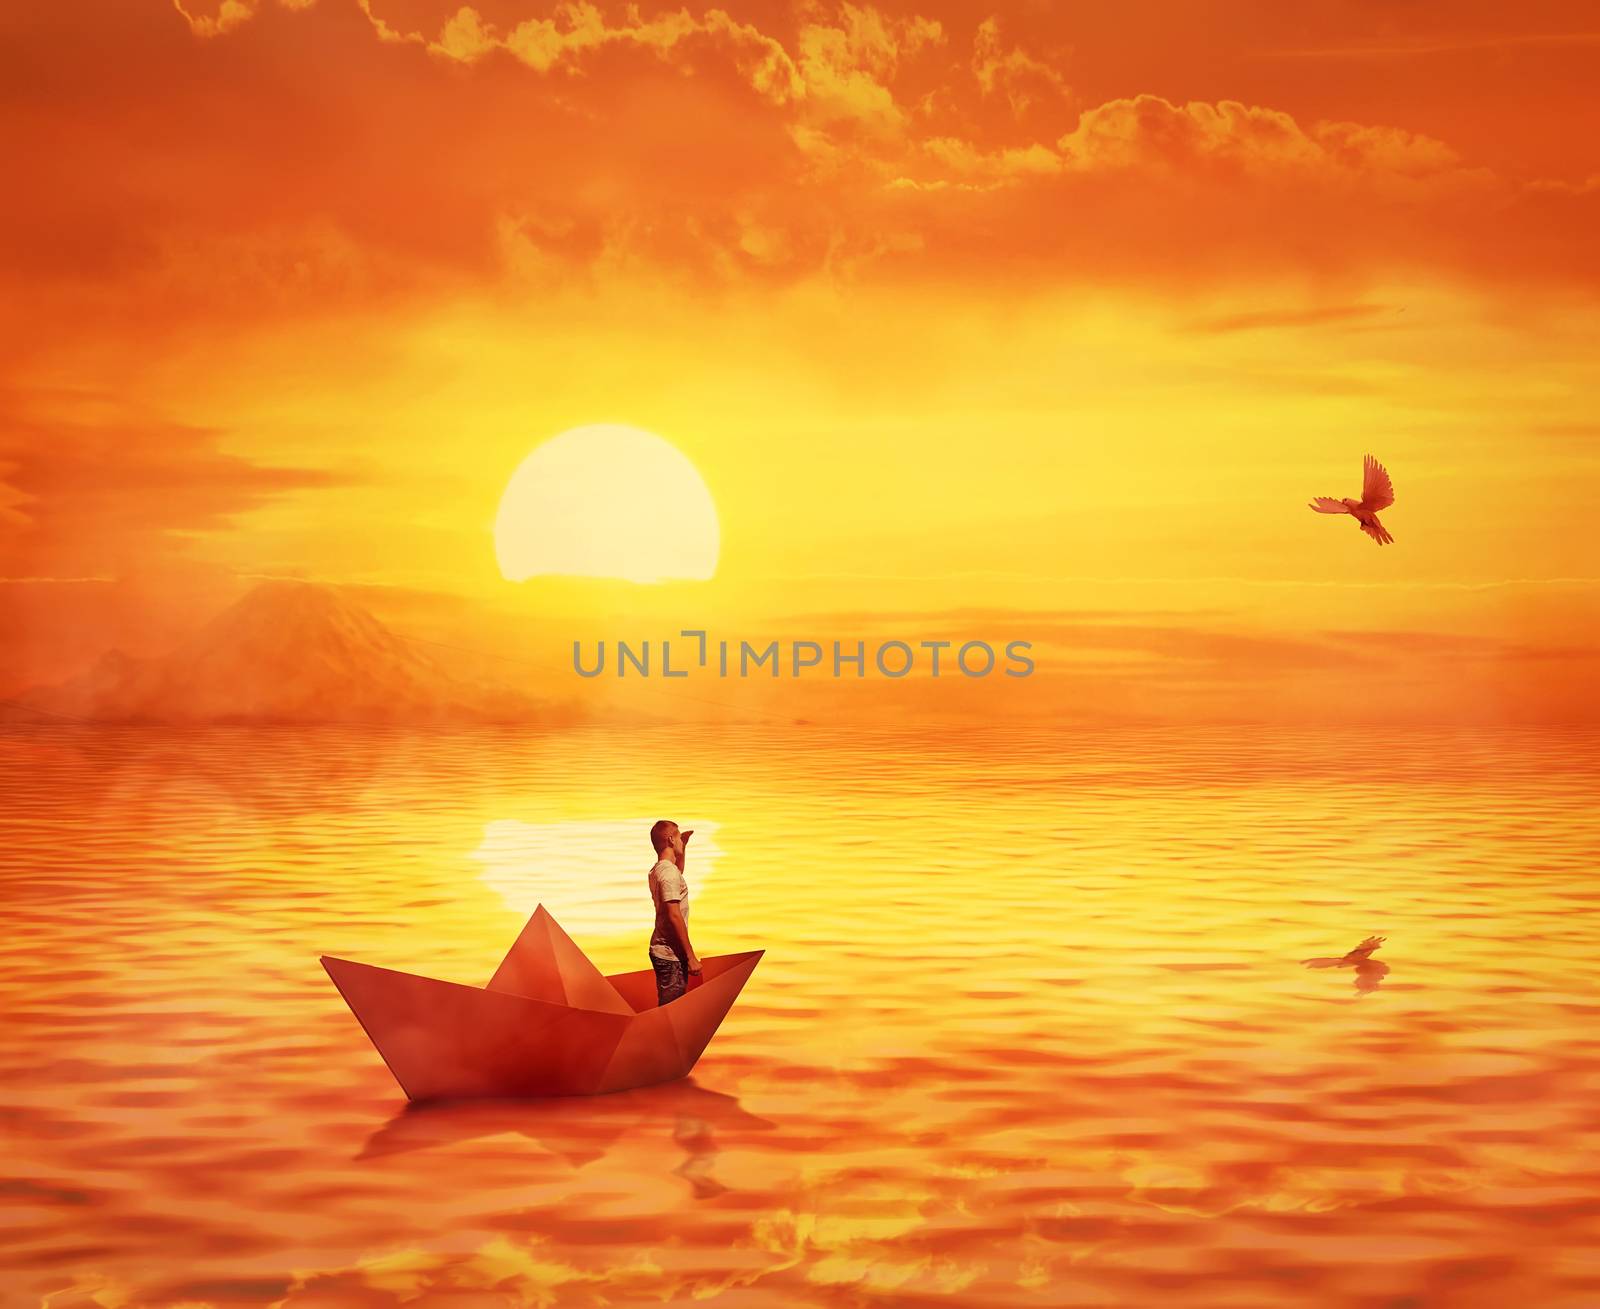 Silhouette of a lonely boy in a paper boat sailing lost in the ocean, against orange sunset sky and a pigeon flying to find the shore. Adventure and journey concept, searching for help.